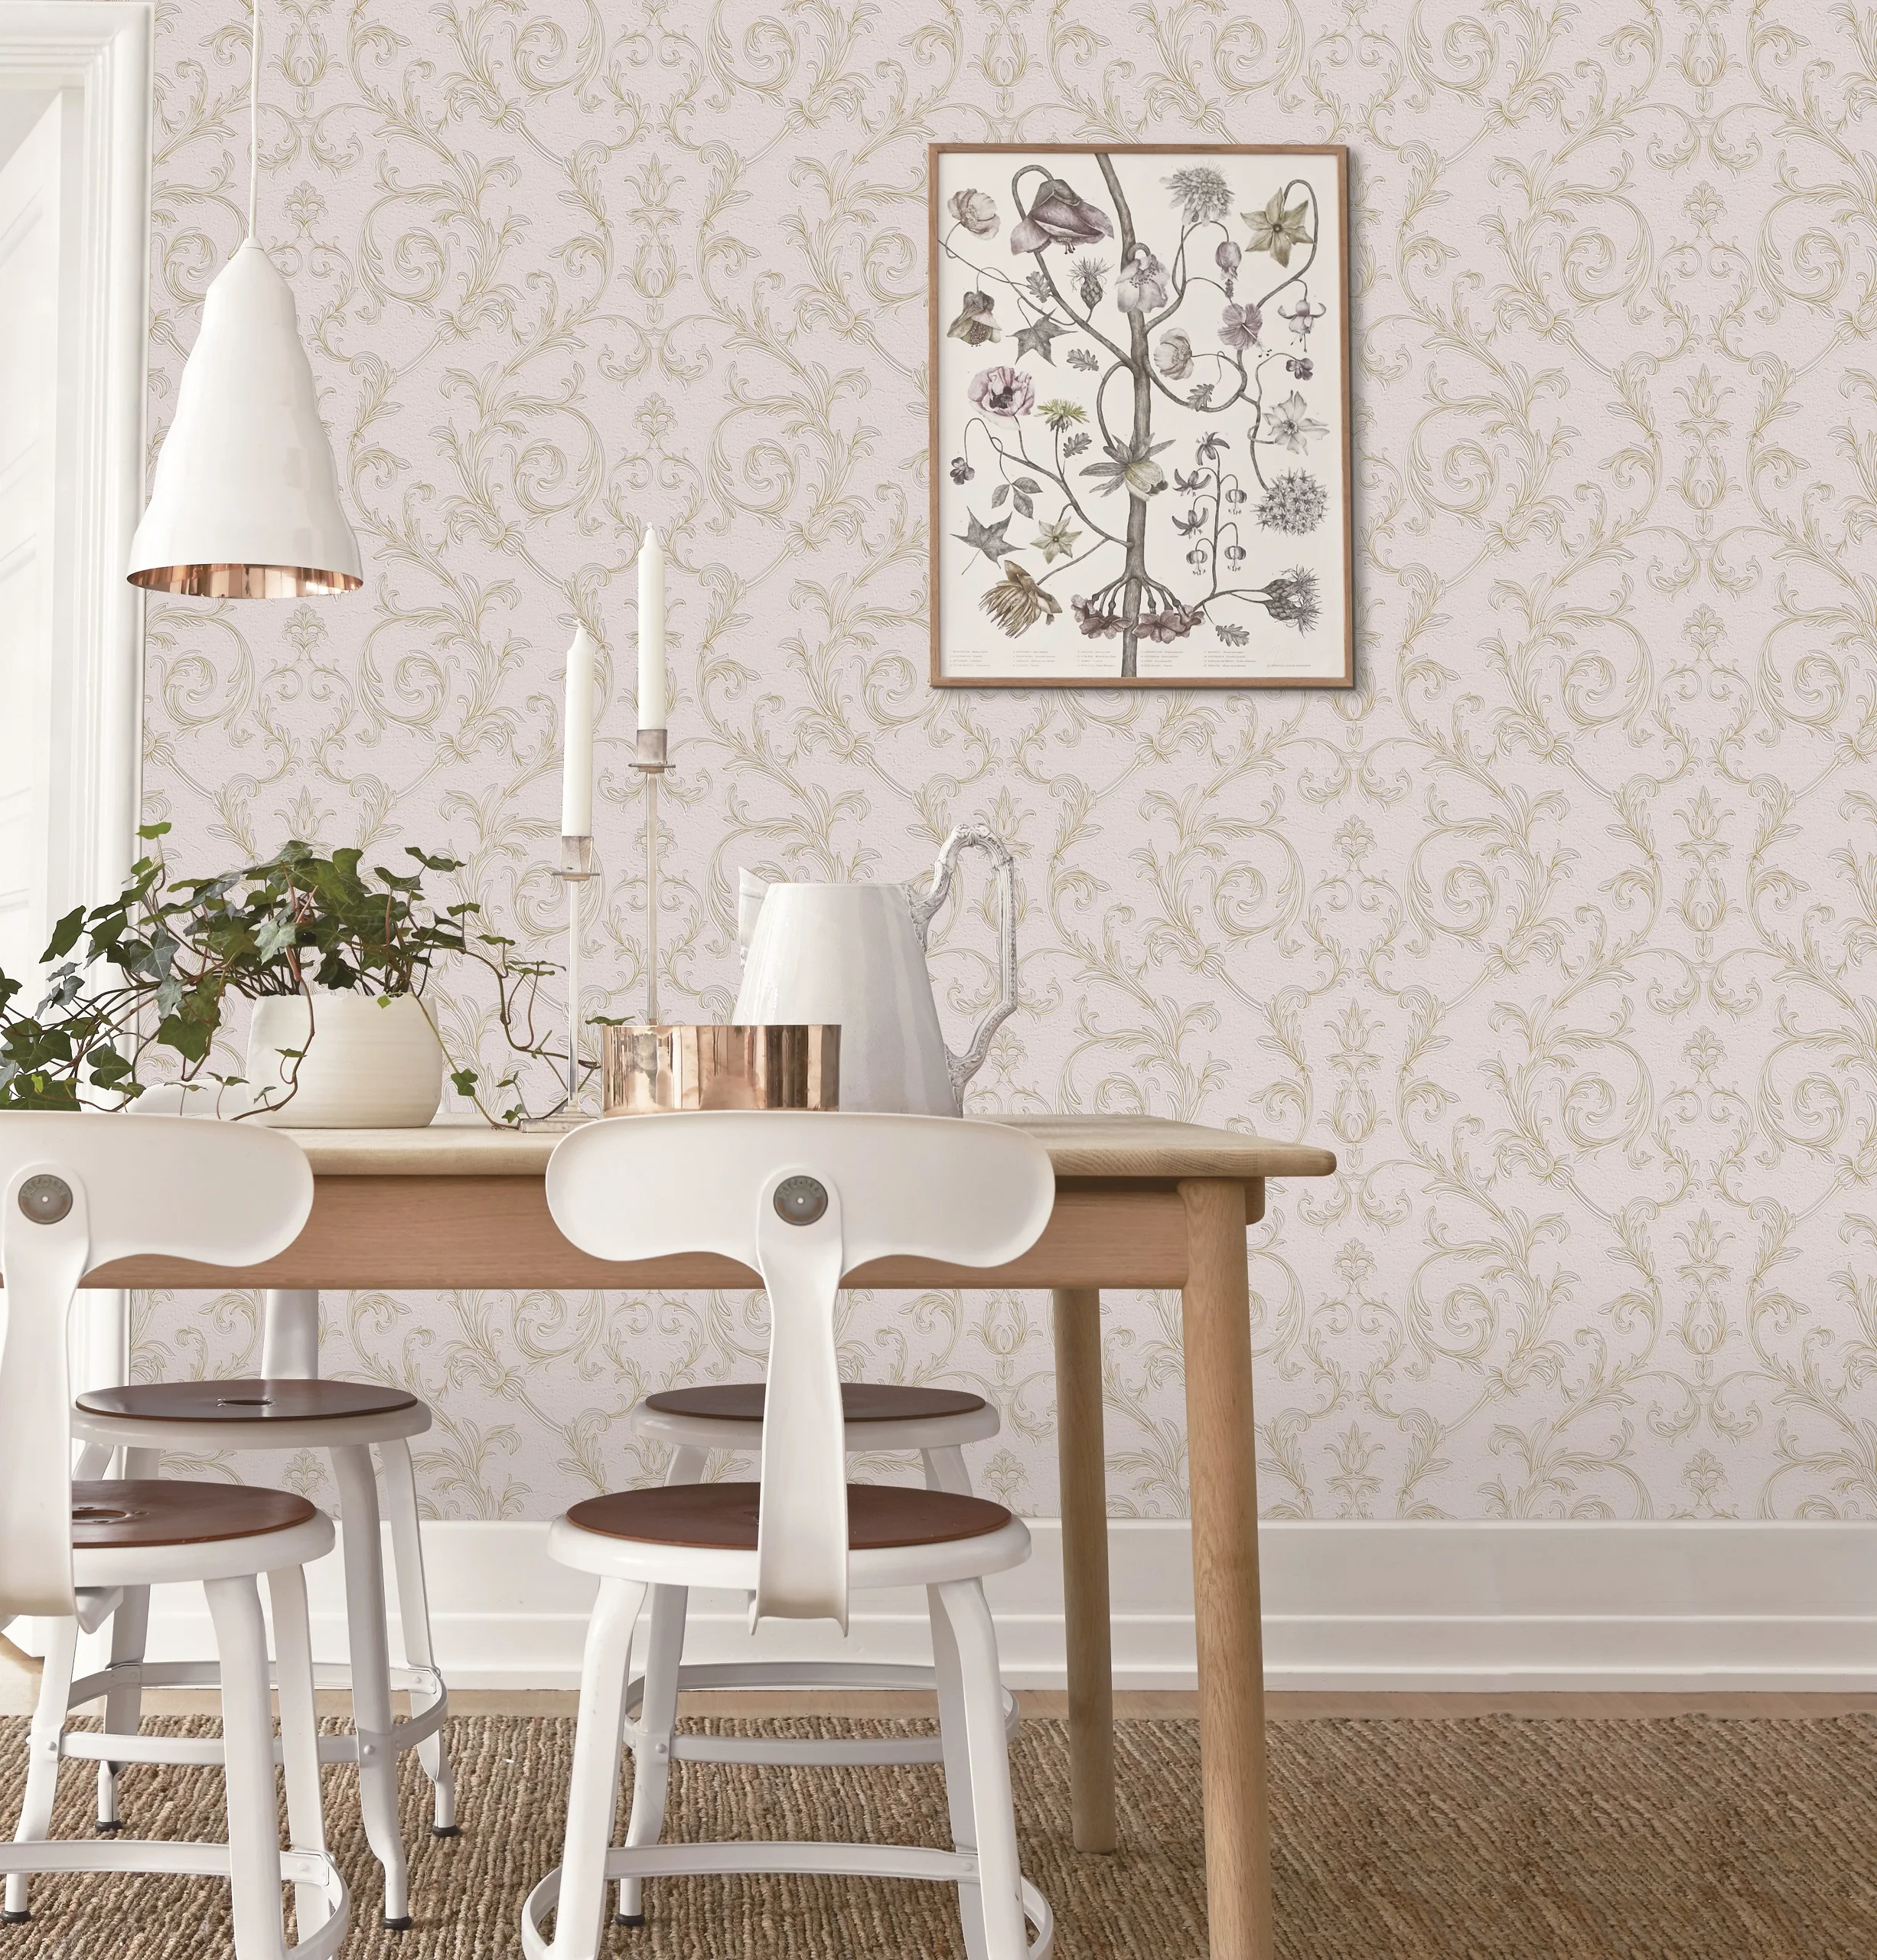 Highly Recommend Good Quality Luxury Wallpaper Home Decoration Glistening  Flower Pvc Vinyl Plain Damask Wallpaper - Buy Damask Wallpaper,Plain  Wallpaper,Pvc Vinyl Wallpaper Product on 